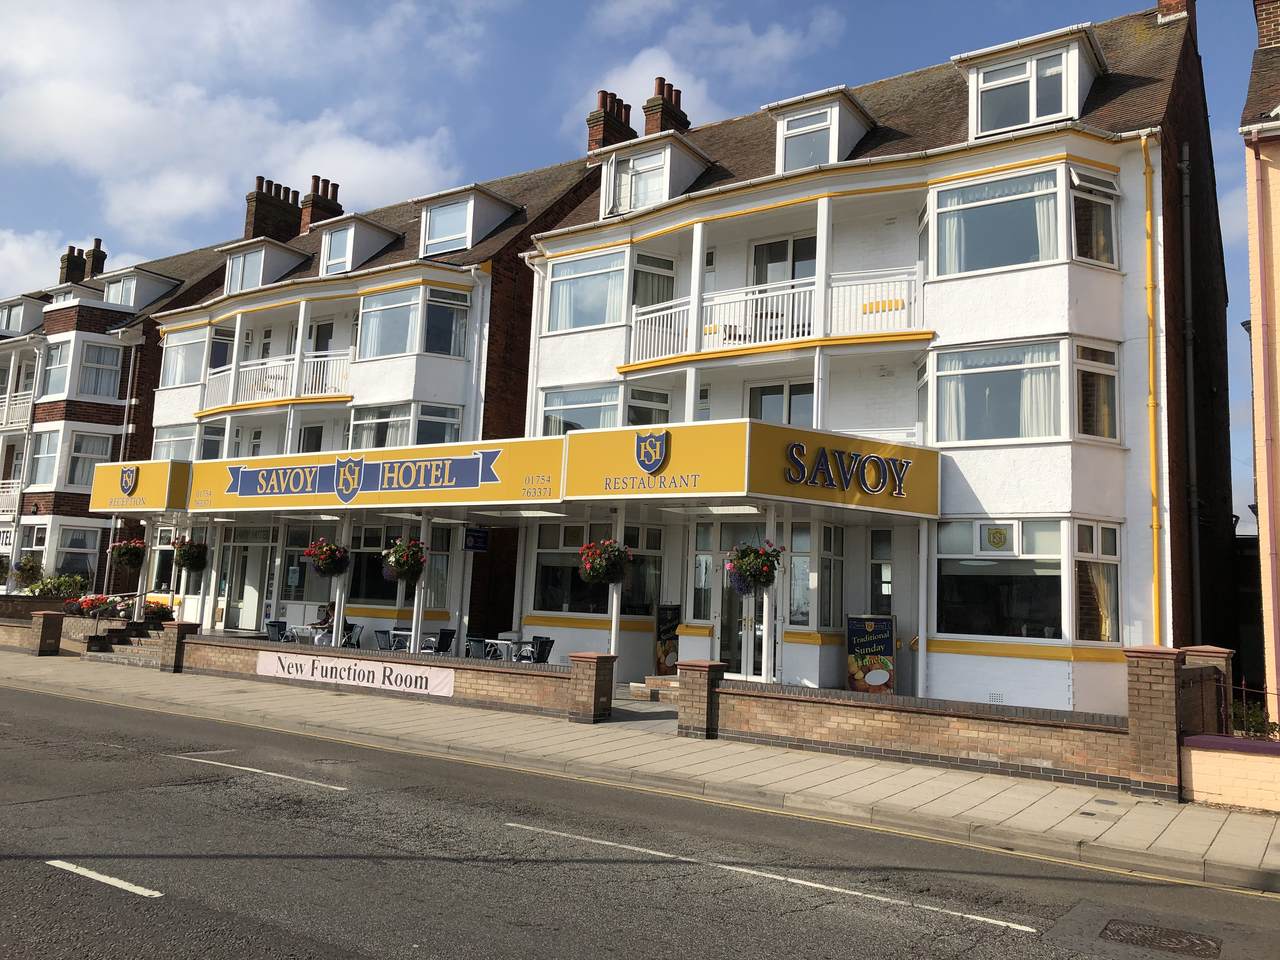 Hotel Review: Savoy Hotel, Skegness